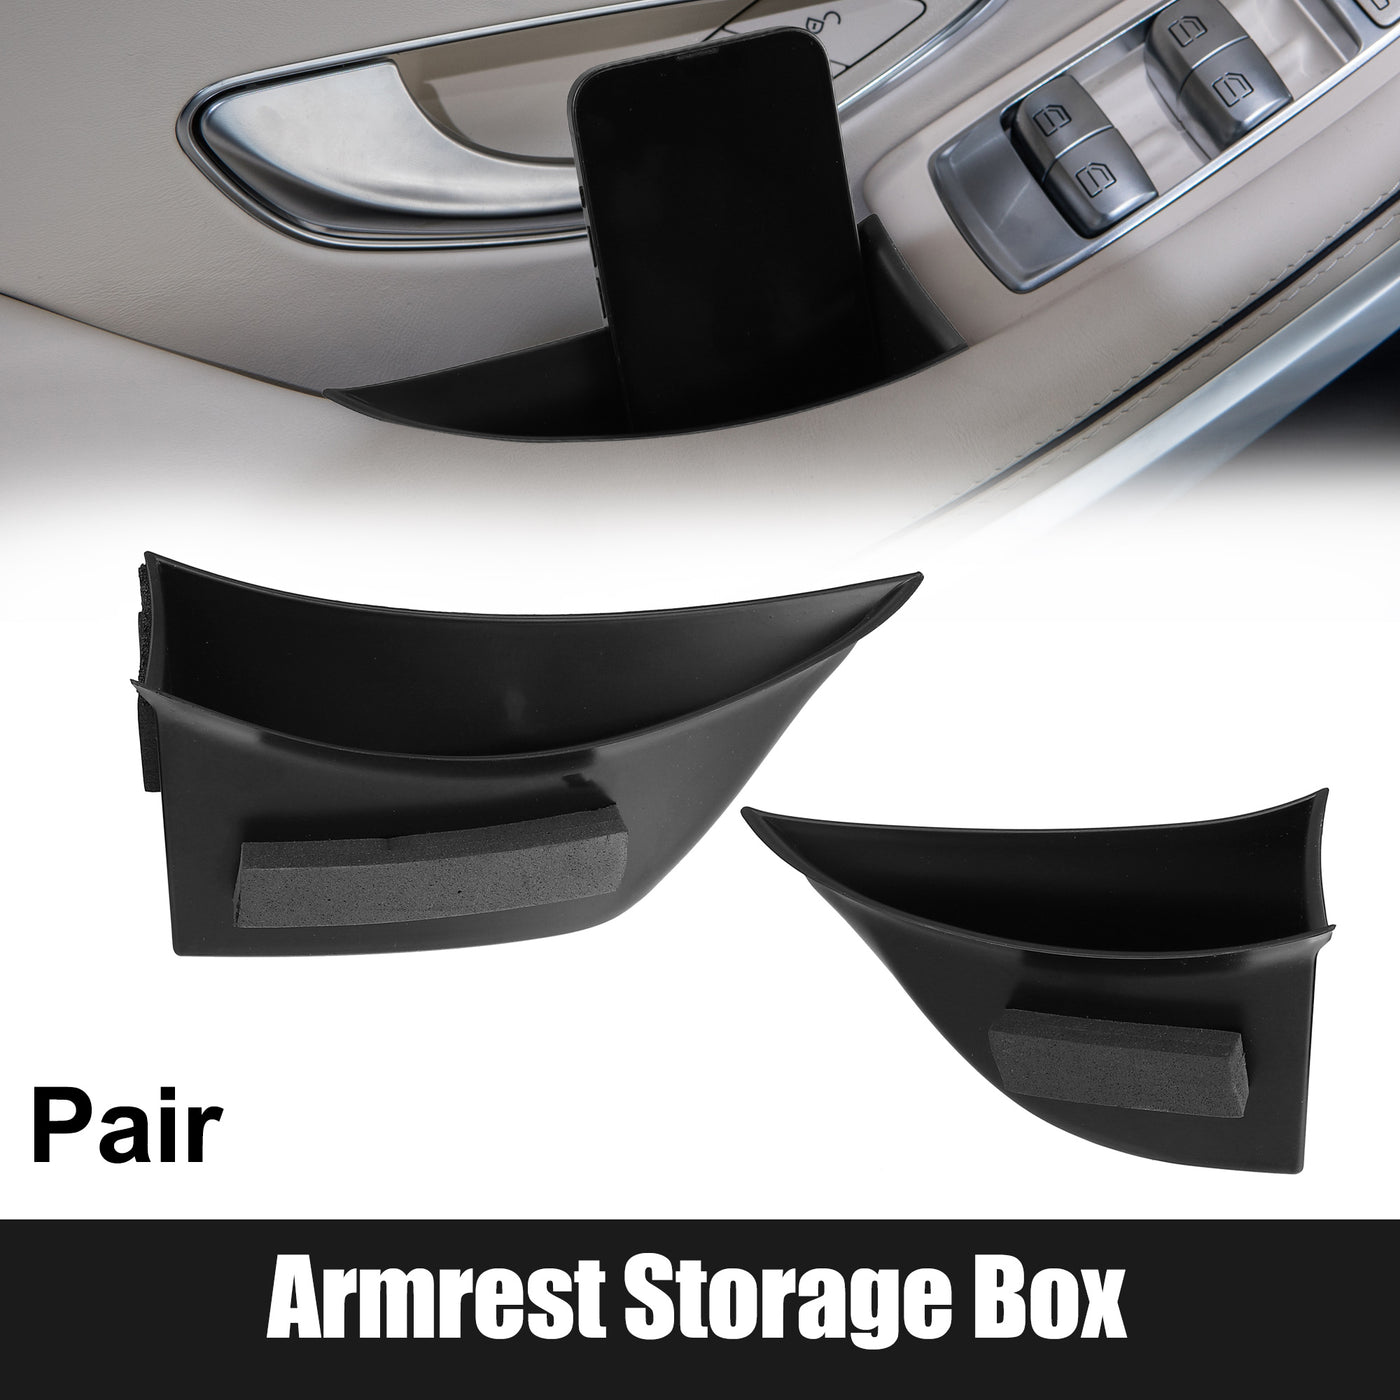 X AUTOHAUX 1 Pair Car Front Door Side Storage Box Inner Armrest Glove Box Holder Pocket Container Accessories for Mercedes-Benz S-Class 2014-2020